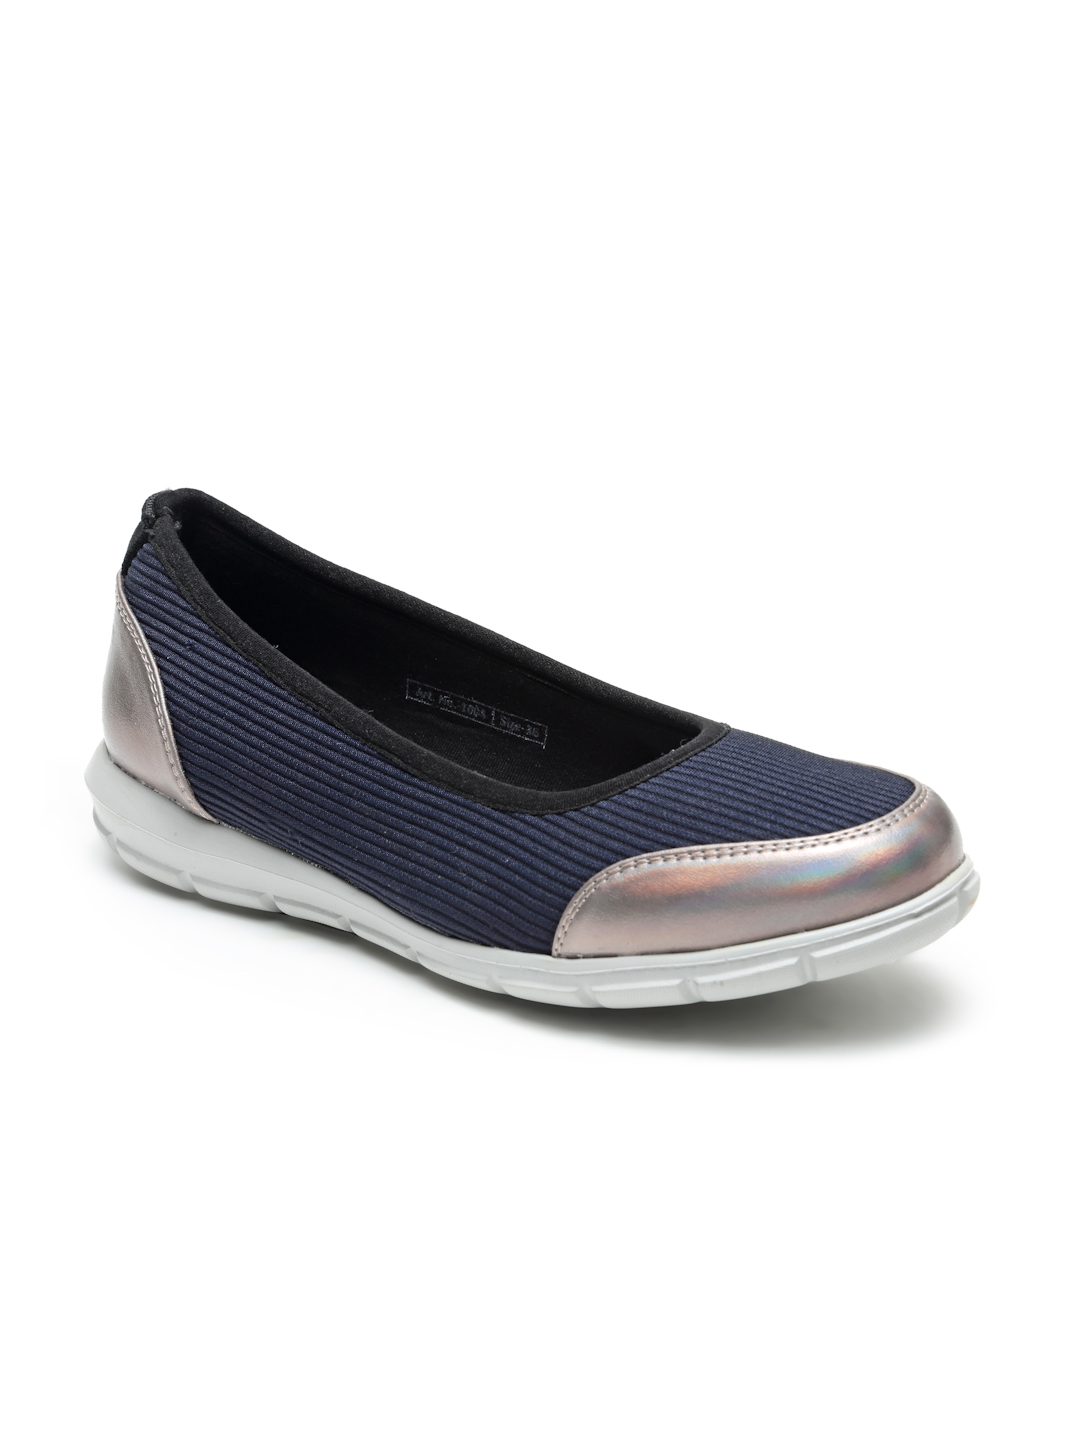 Buy Von Wellx Germany Comfort Women's Blue Casual Shoes Alice Online in Galle